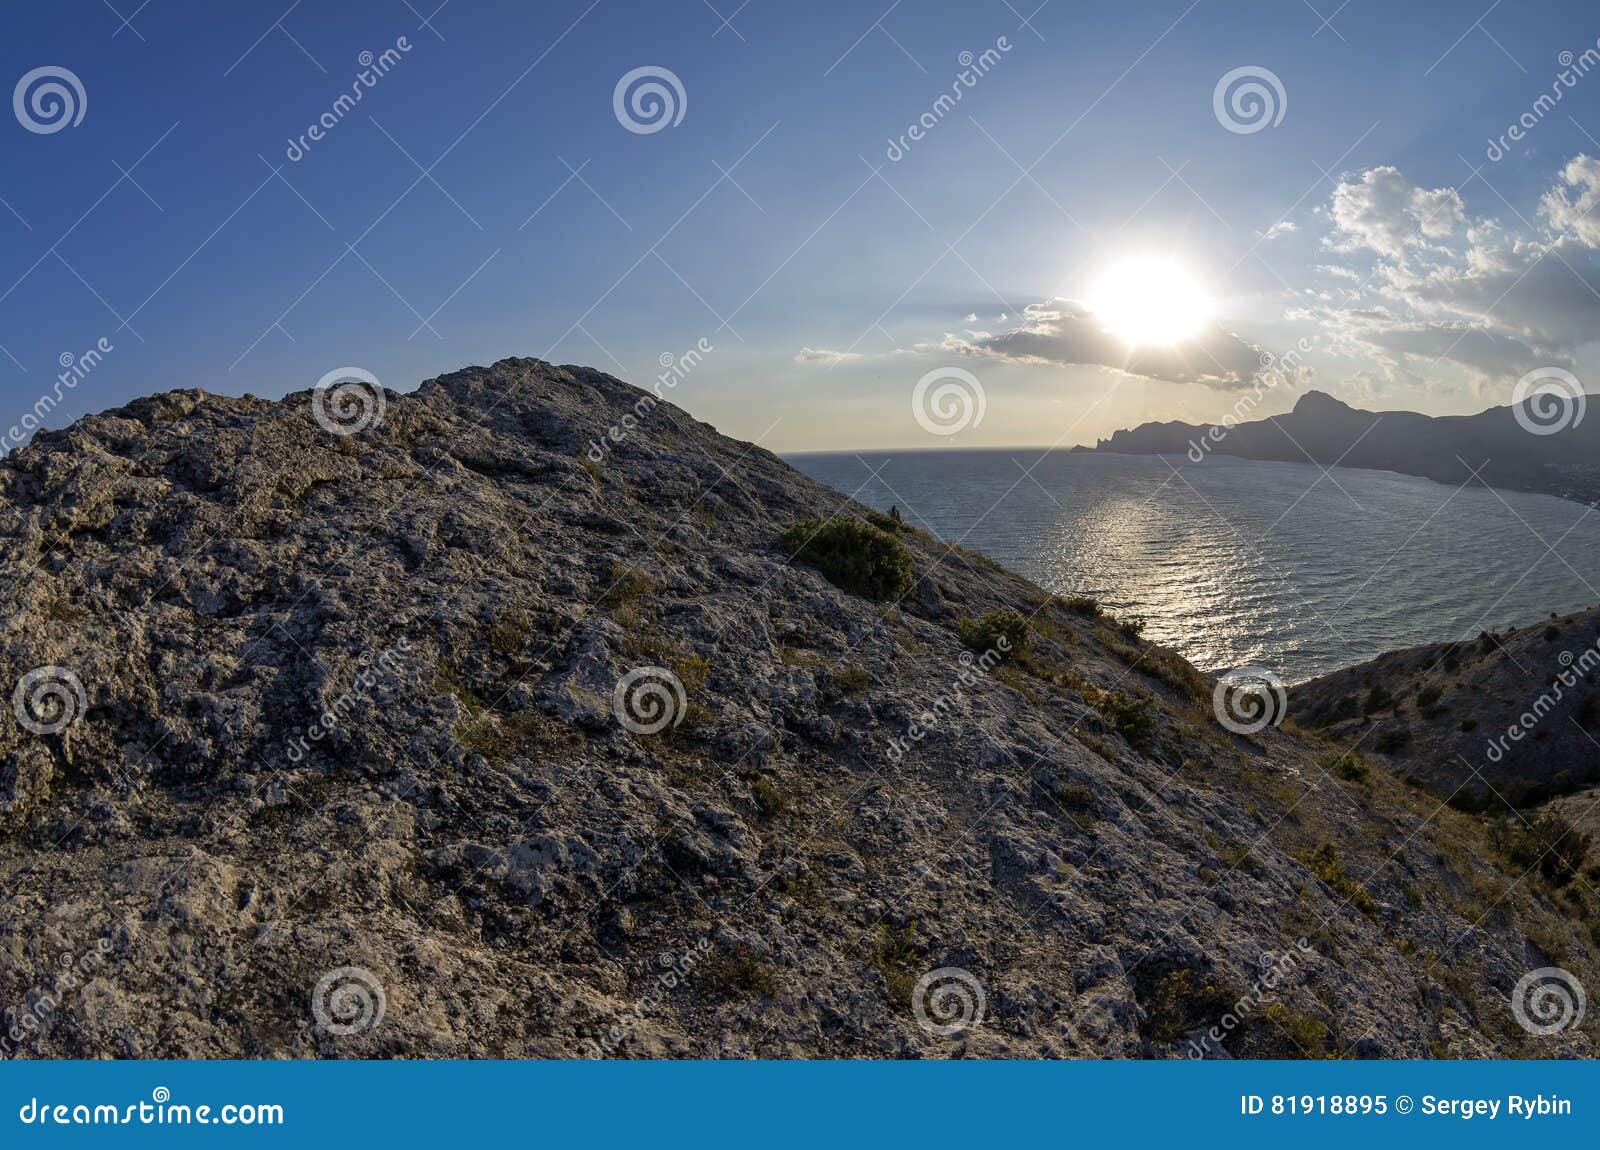 Late Afternoon Sun Over the Horizon. Crimea, September. Stock Image